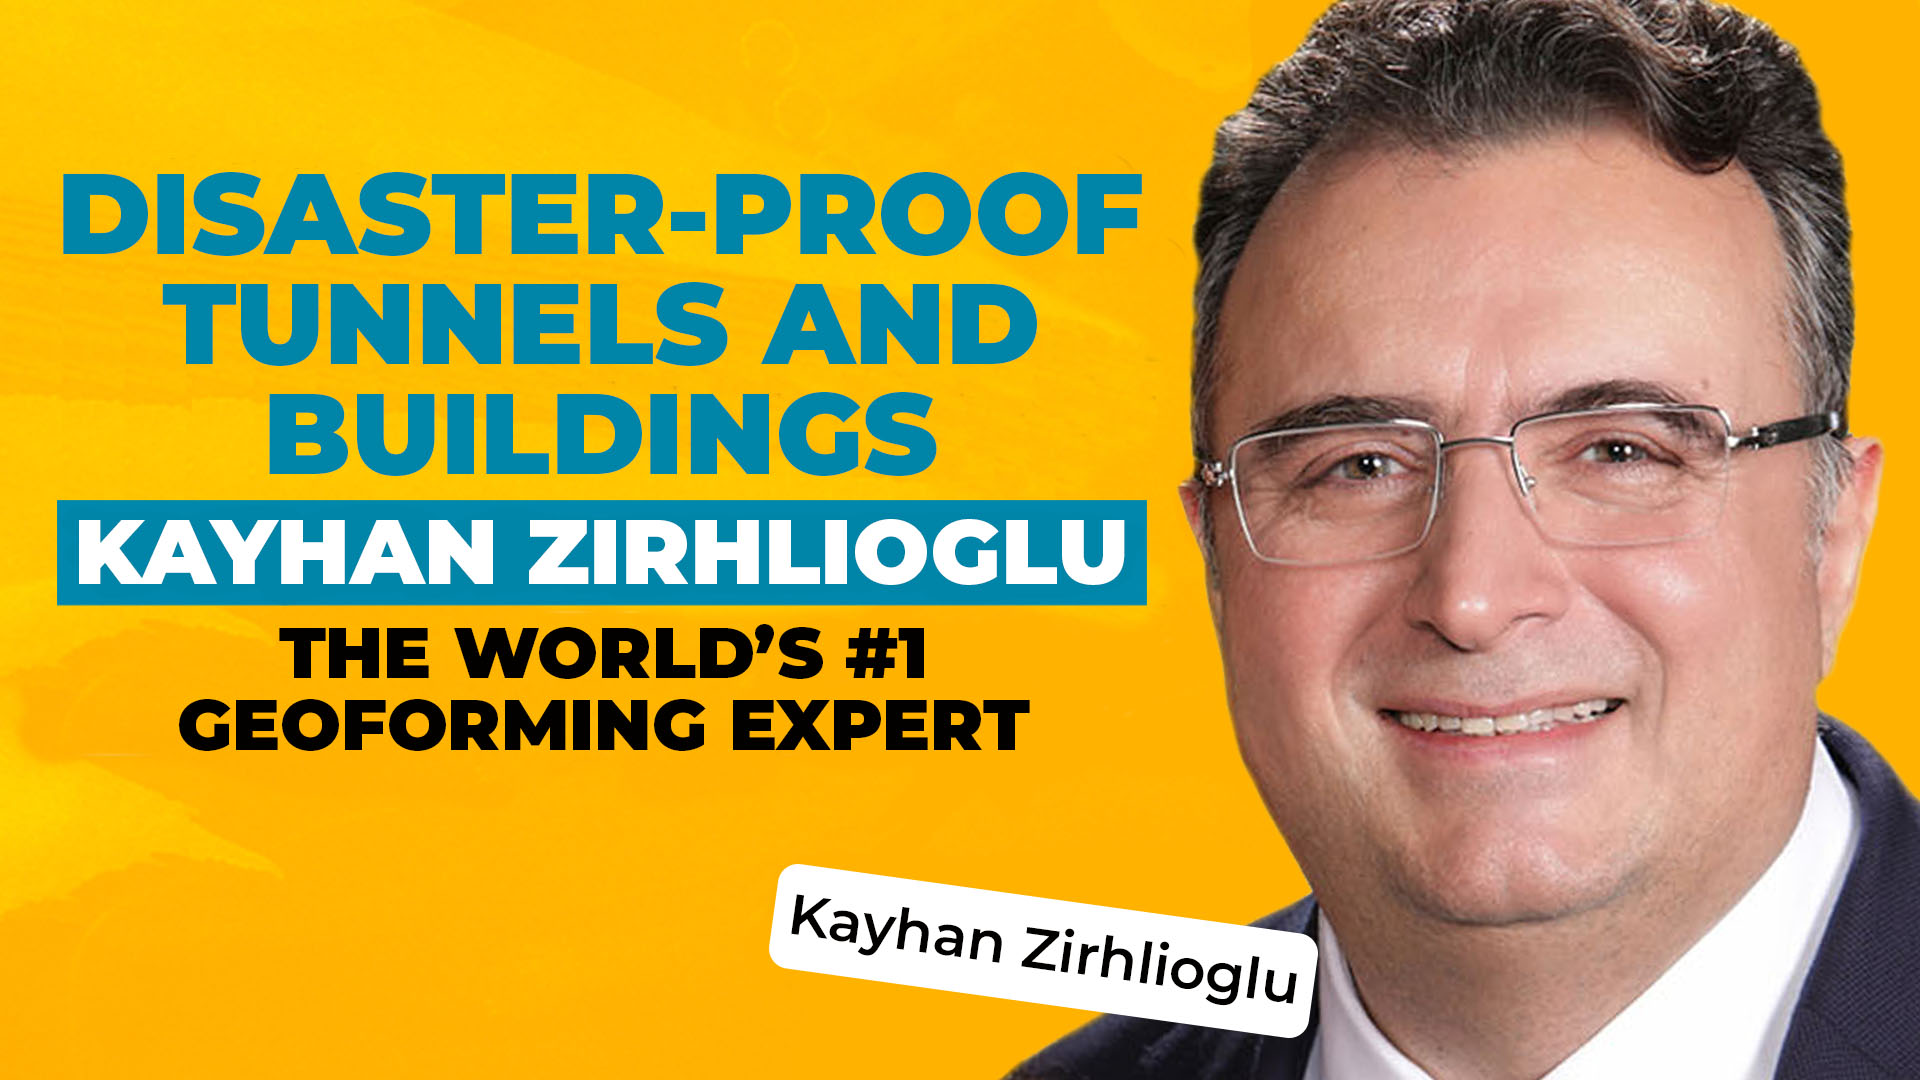 A headshot of Kayhan Zirhlioglu on a bold yellow background, along with text reading "Disaster-Proof Tunnels and Buildings - Kayhan Zirhlioglu - The World's #1 Geoforming Expert."